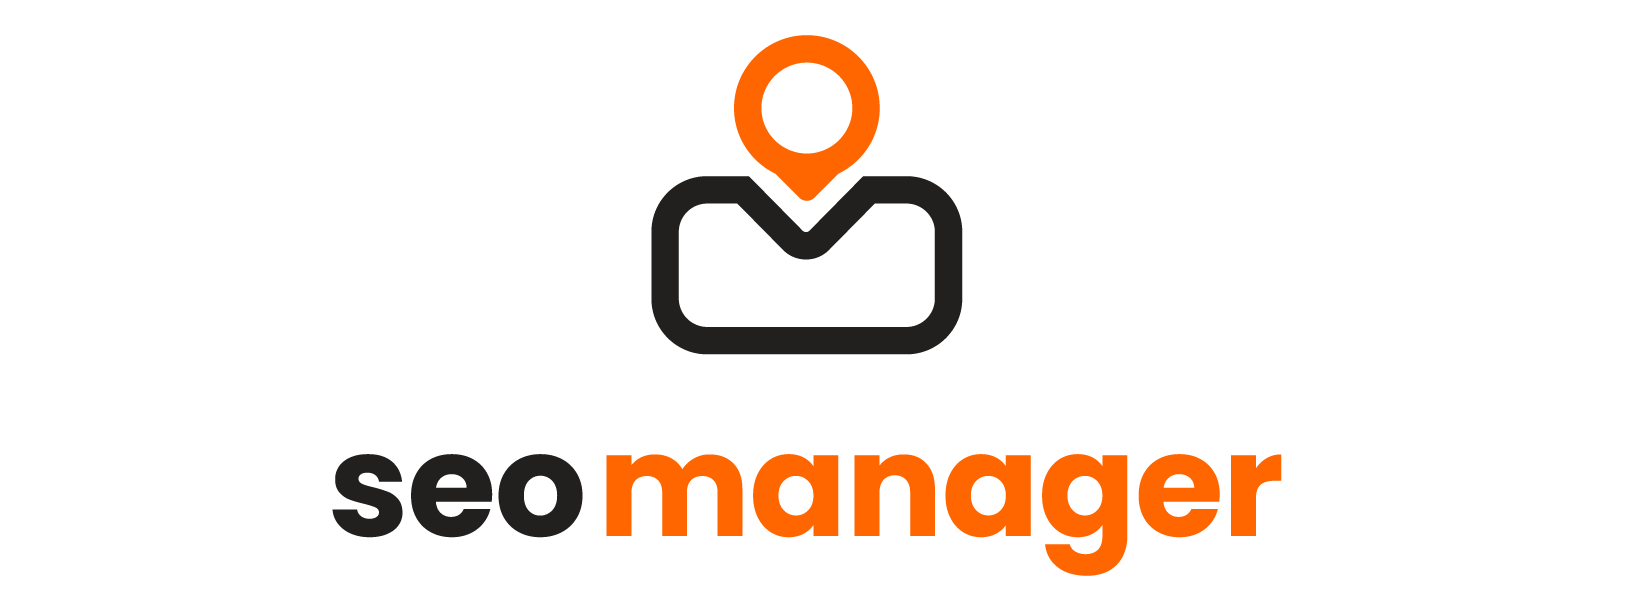 Our seo manager logo